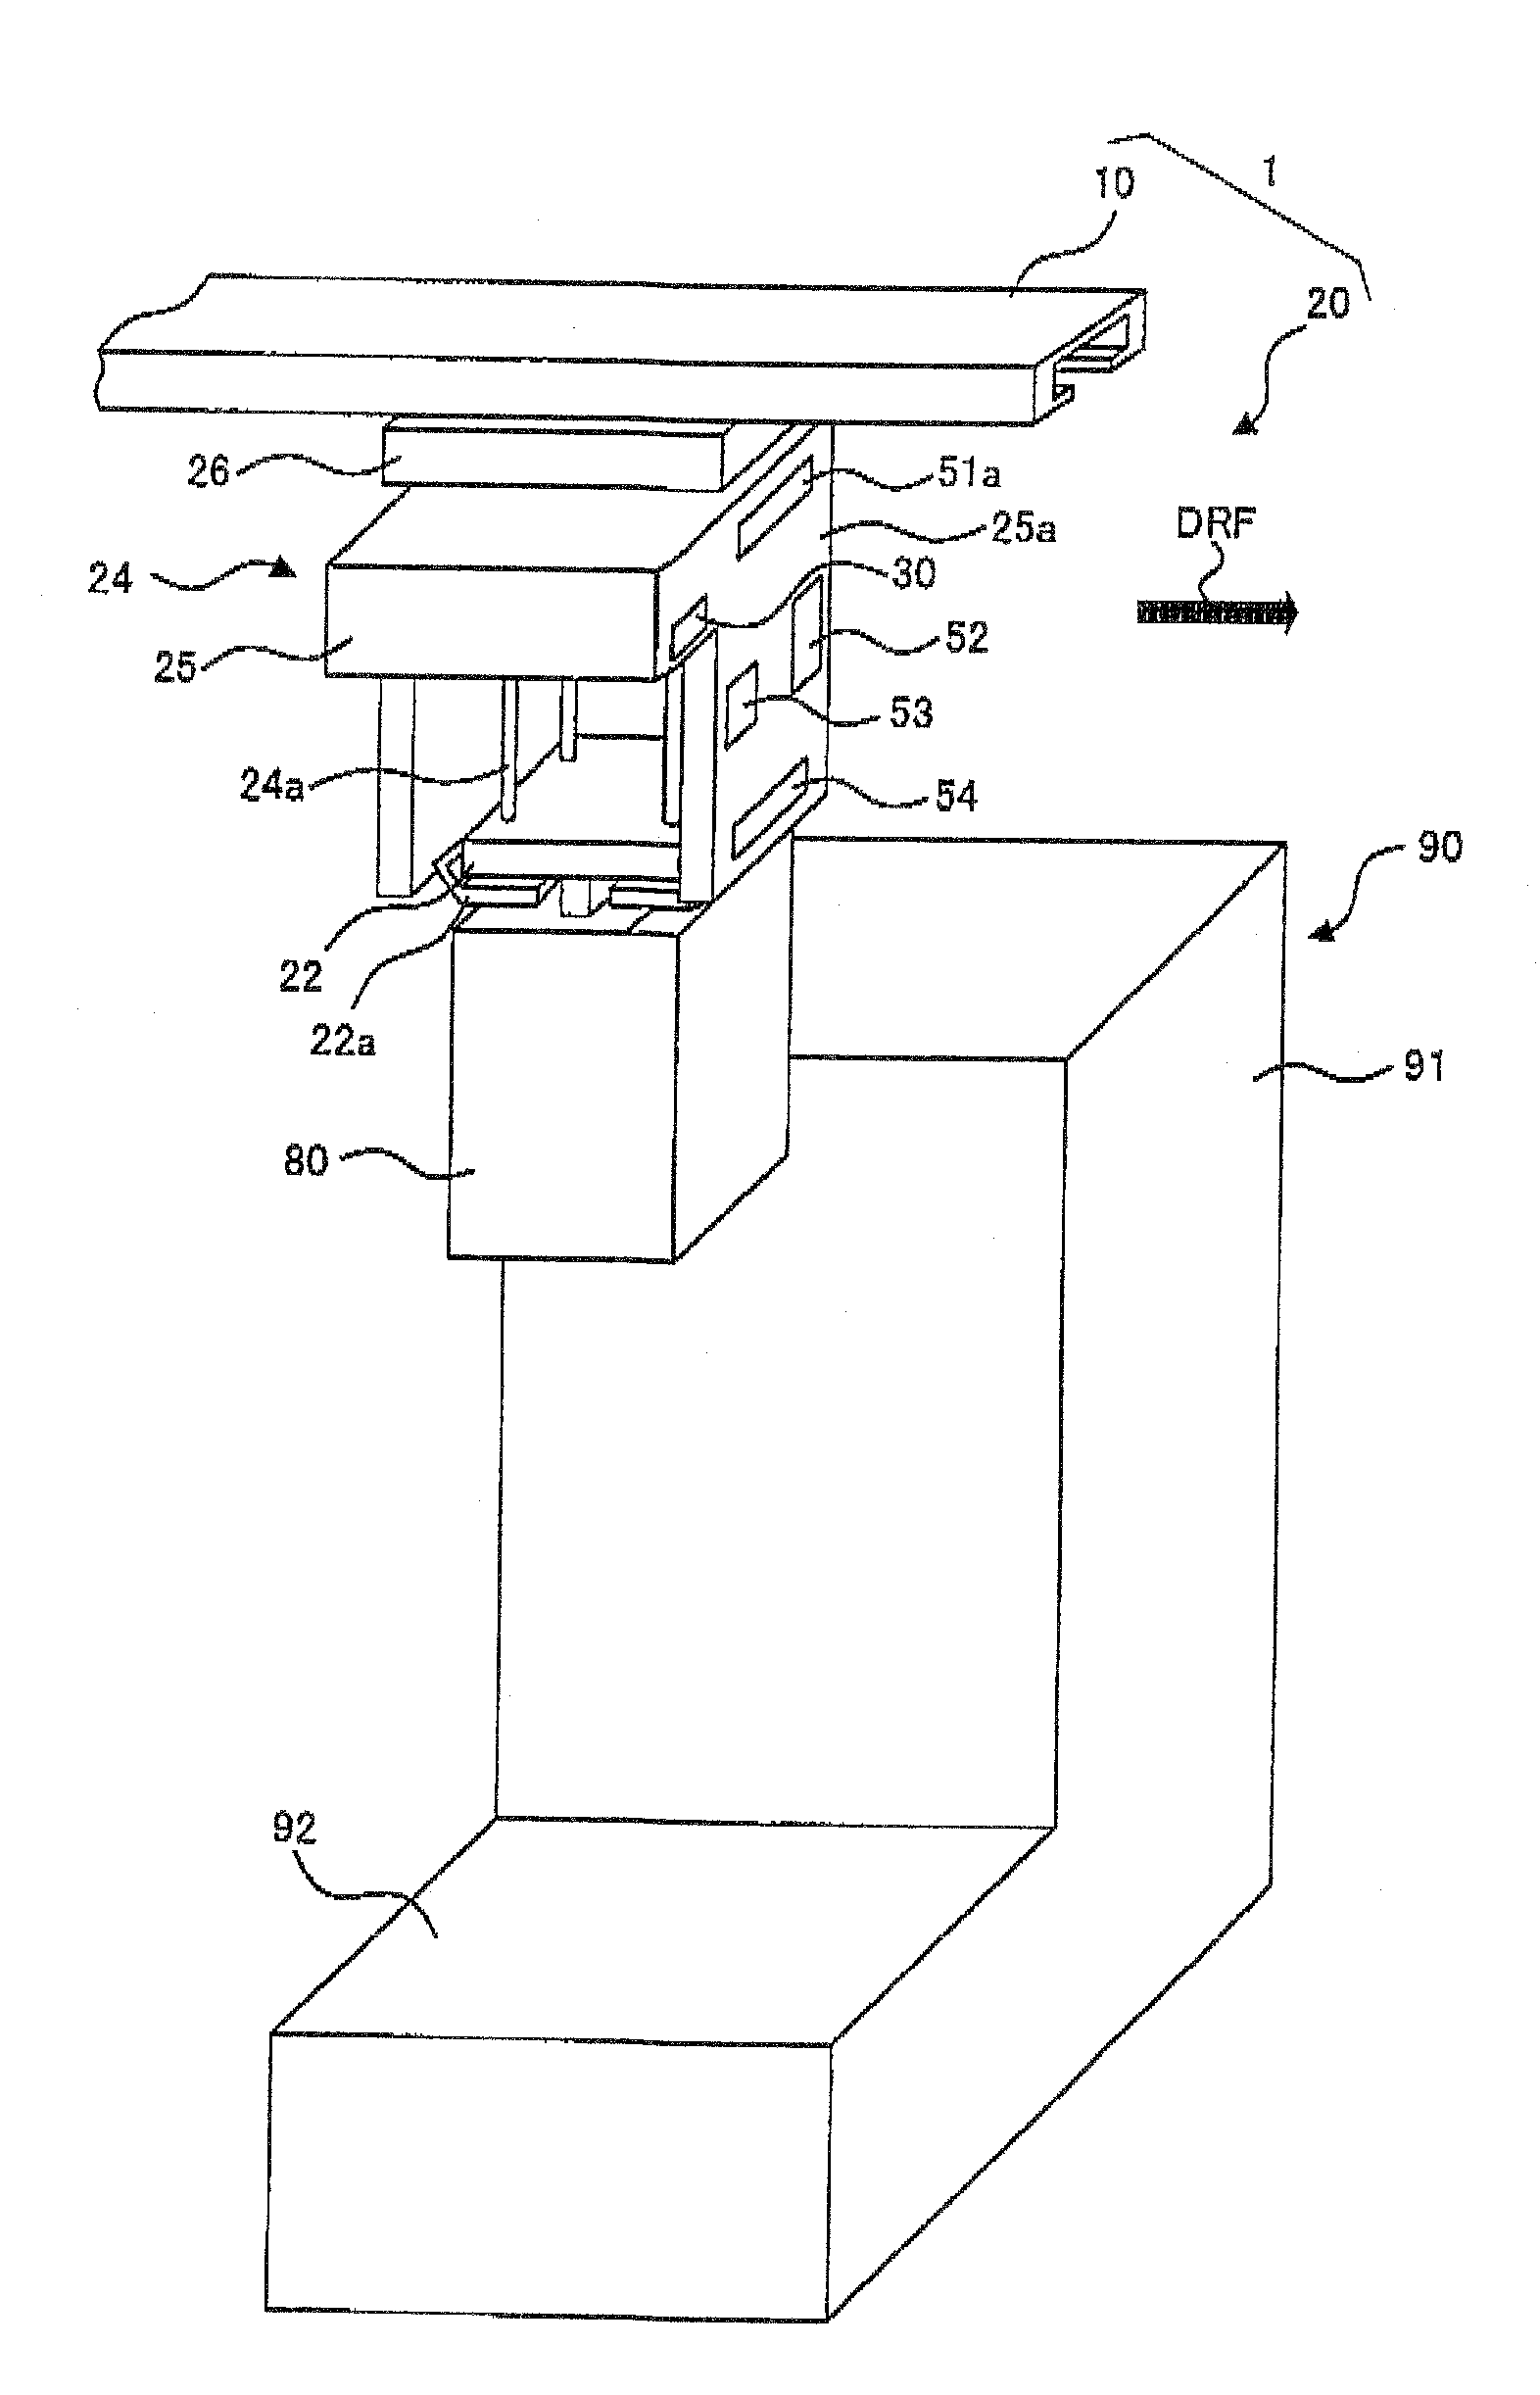 Overhead traveling and transporting apparatus